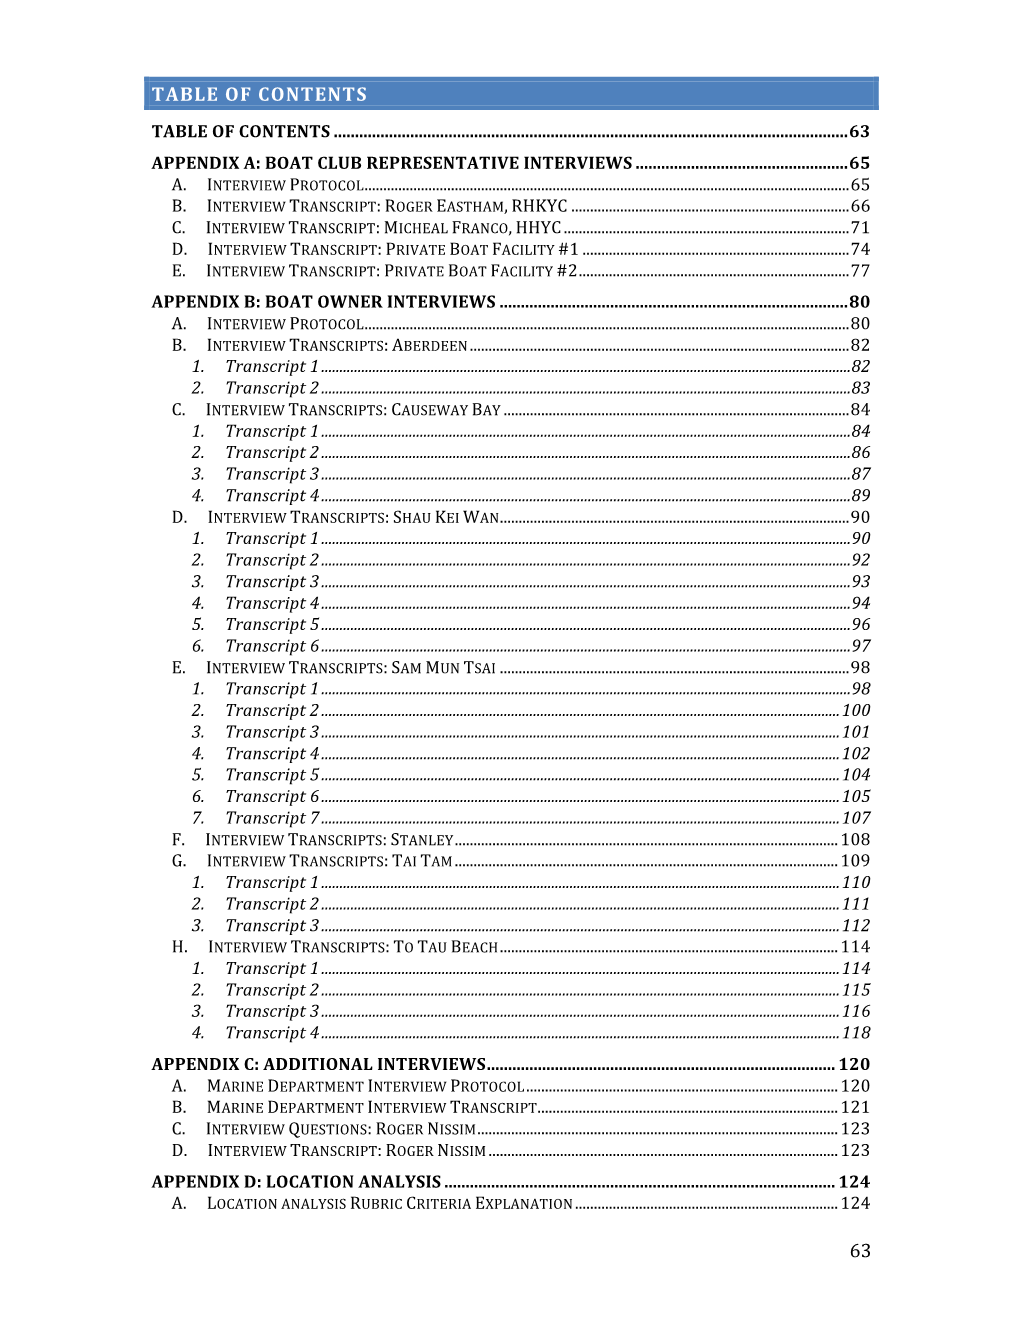 63 Table of Contents